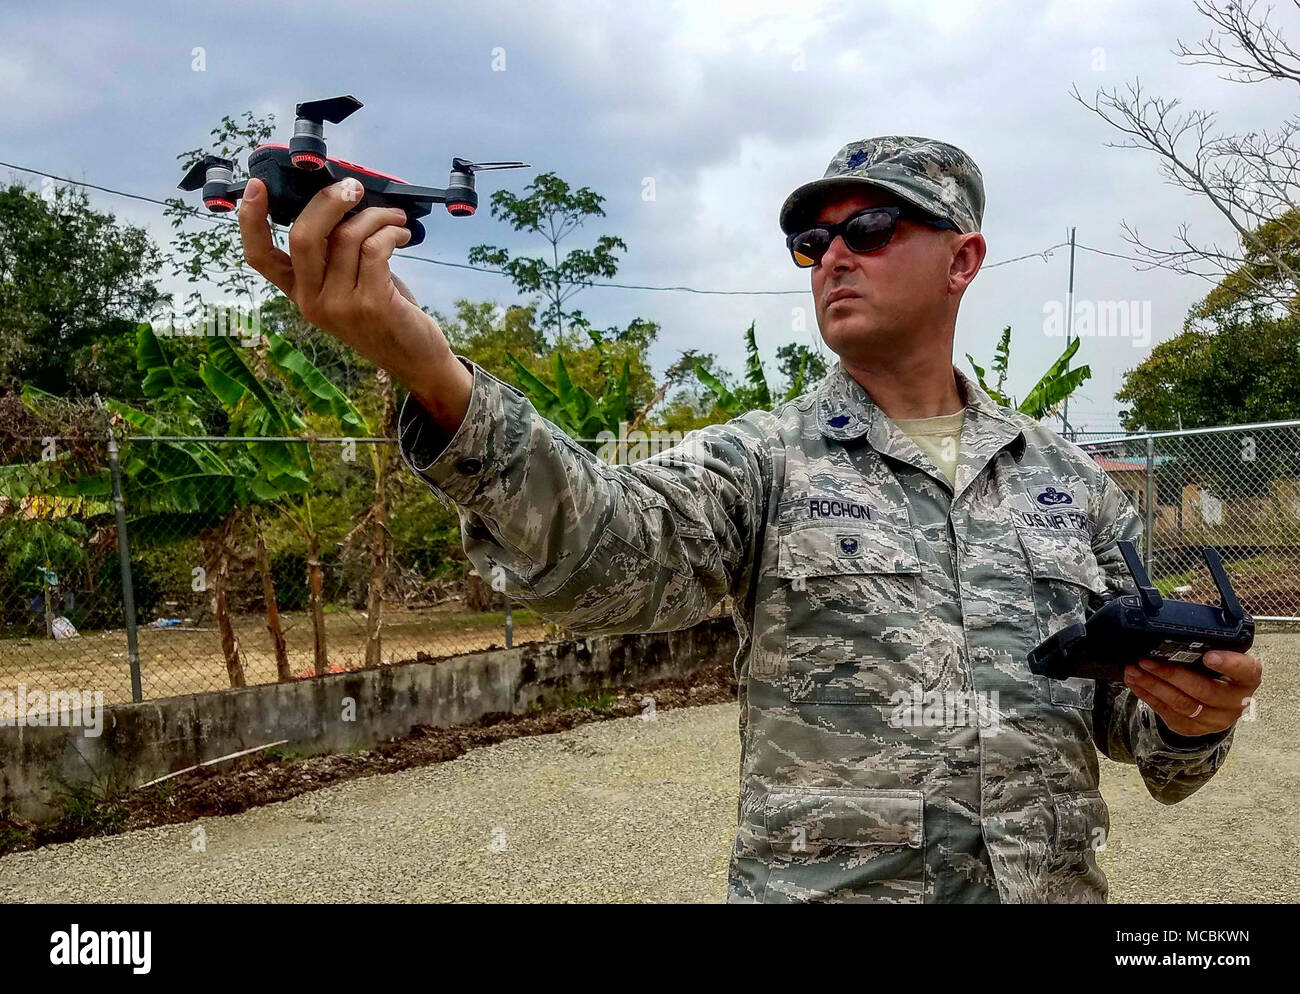 U.S. Air Force Lt. Col. Matthew Rochon, 346th Air Expeditionary Group deputy commander, prepares to operate a small drone to photograph work sites in Meteti, Panama, March 30, 2018. As construction projects continue, photographs will help document the work being done. Exercise New Horizons is a joint training exercise where all branches of the U.S. military conduct training in civil engineer, medical and support services while benefiting the local community. Stock Photo